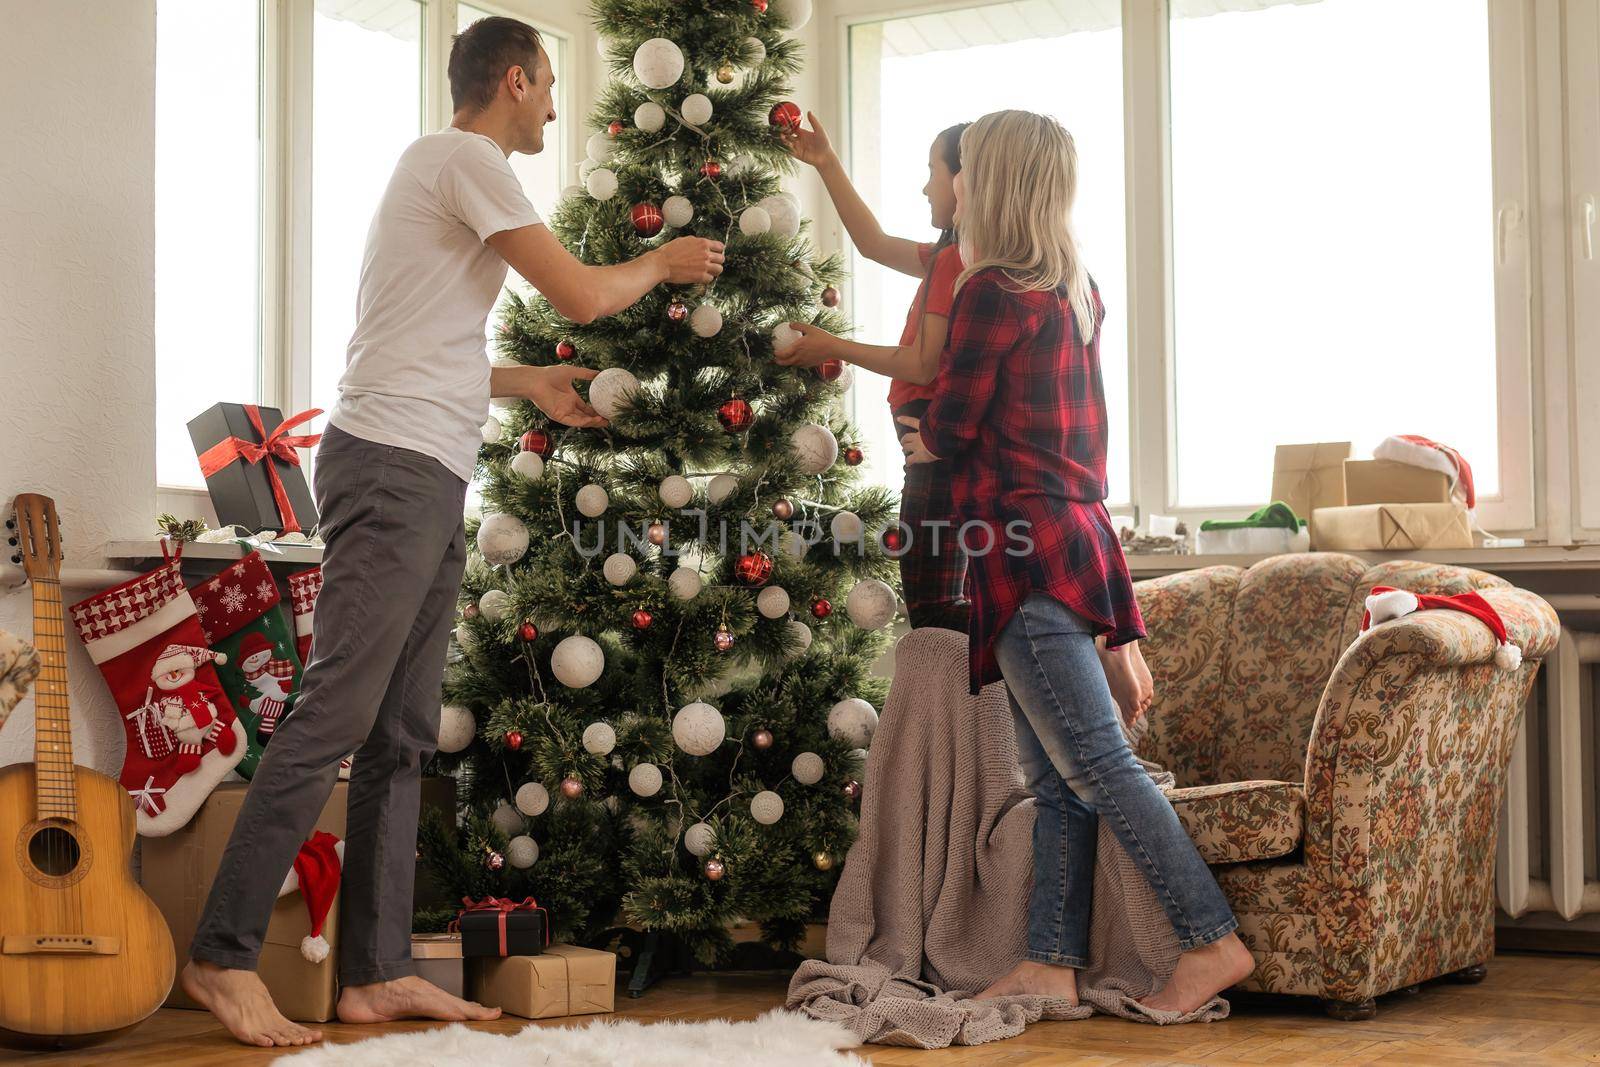 Family decorating a Christmas tree.